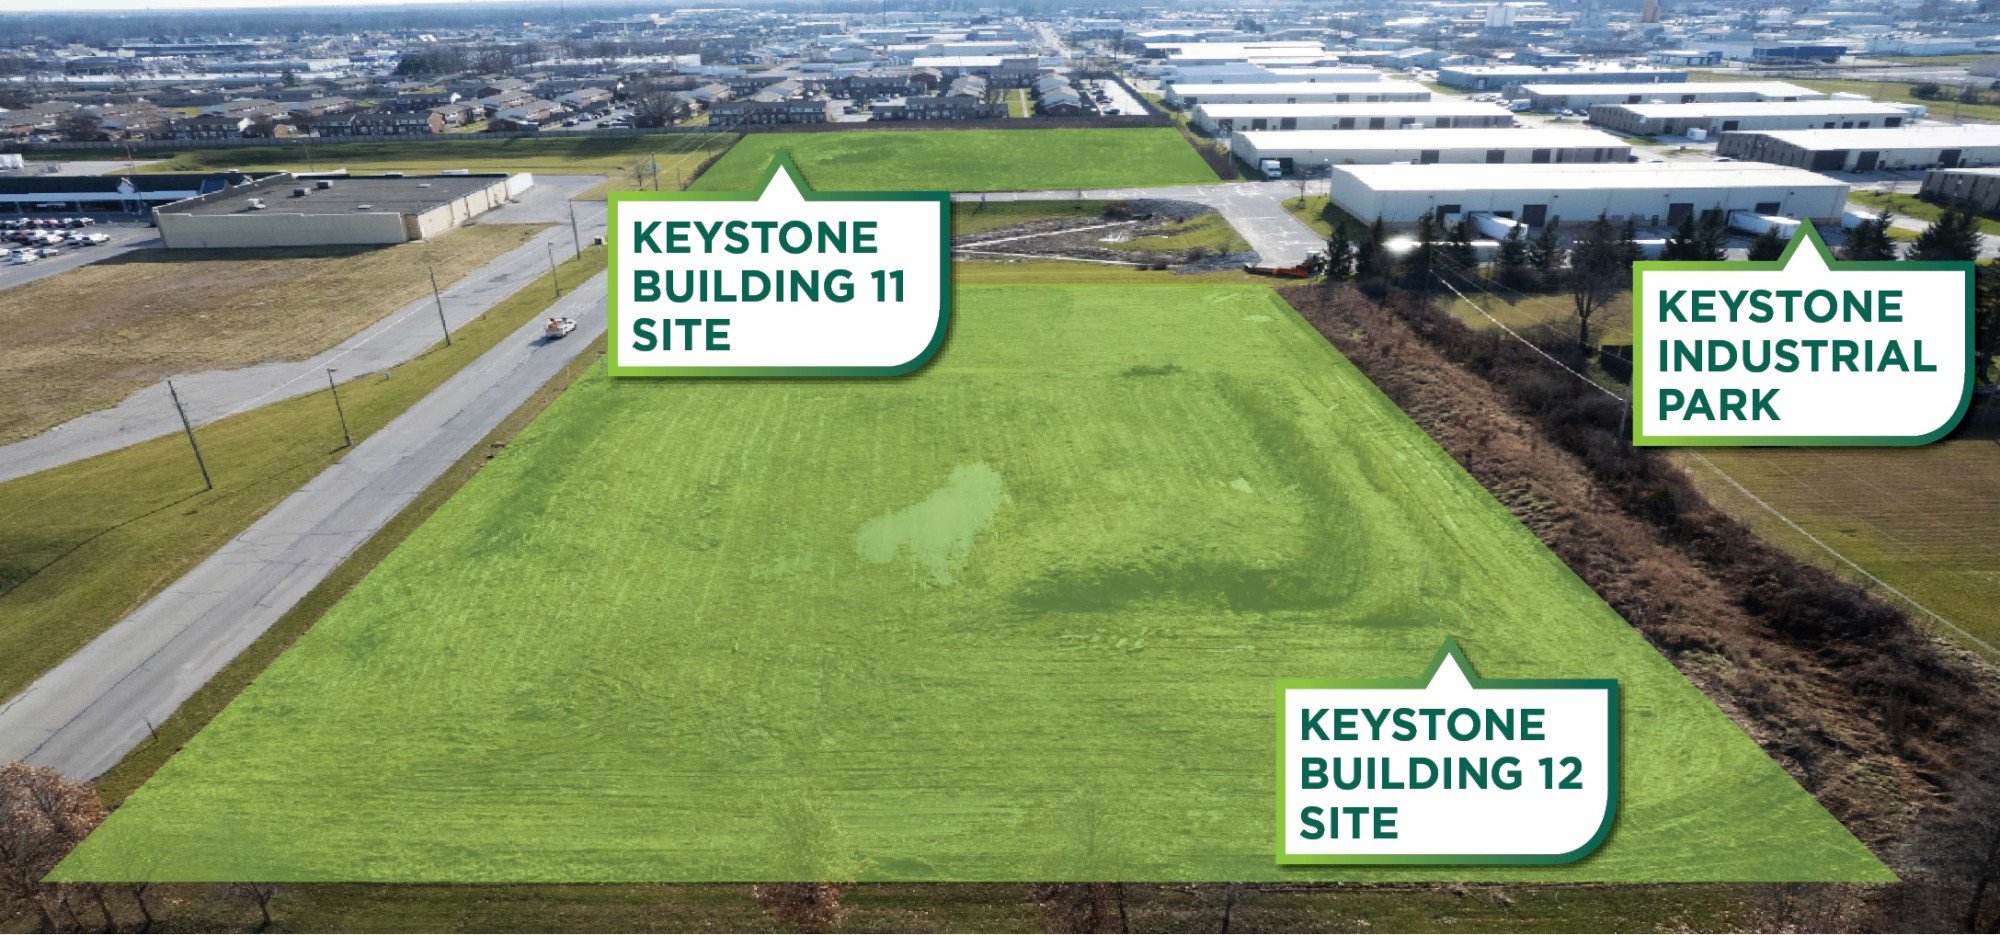 Sturges Property Group - Keystone Industrial Park - New Construction Buildings 11 & 12